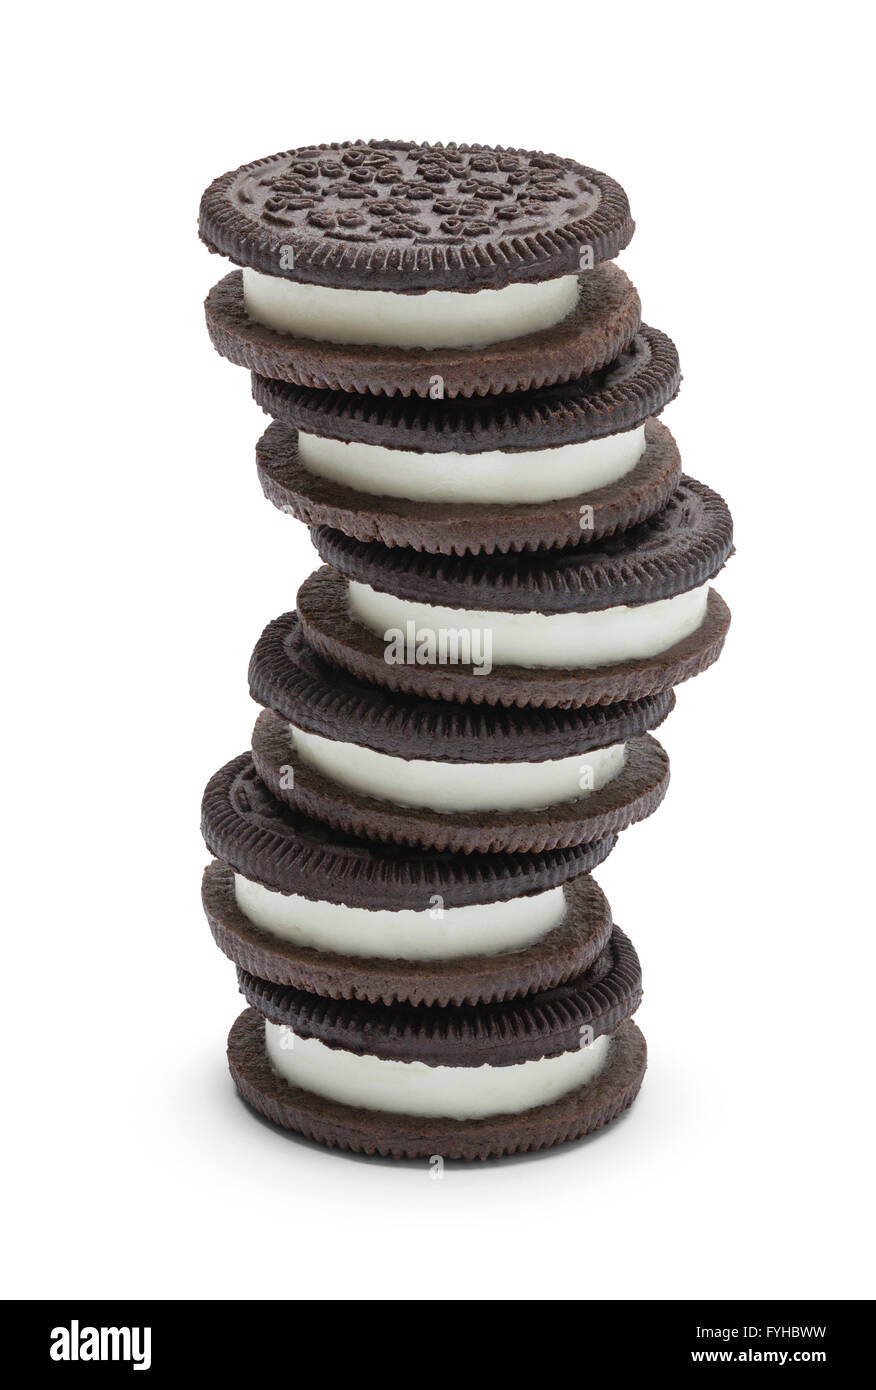 Stack of Chocolate Sandwich Cookies With Frosting Isolated on White Background. Stock Photo